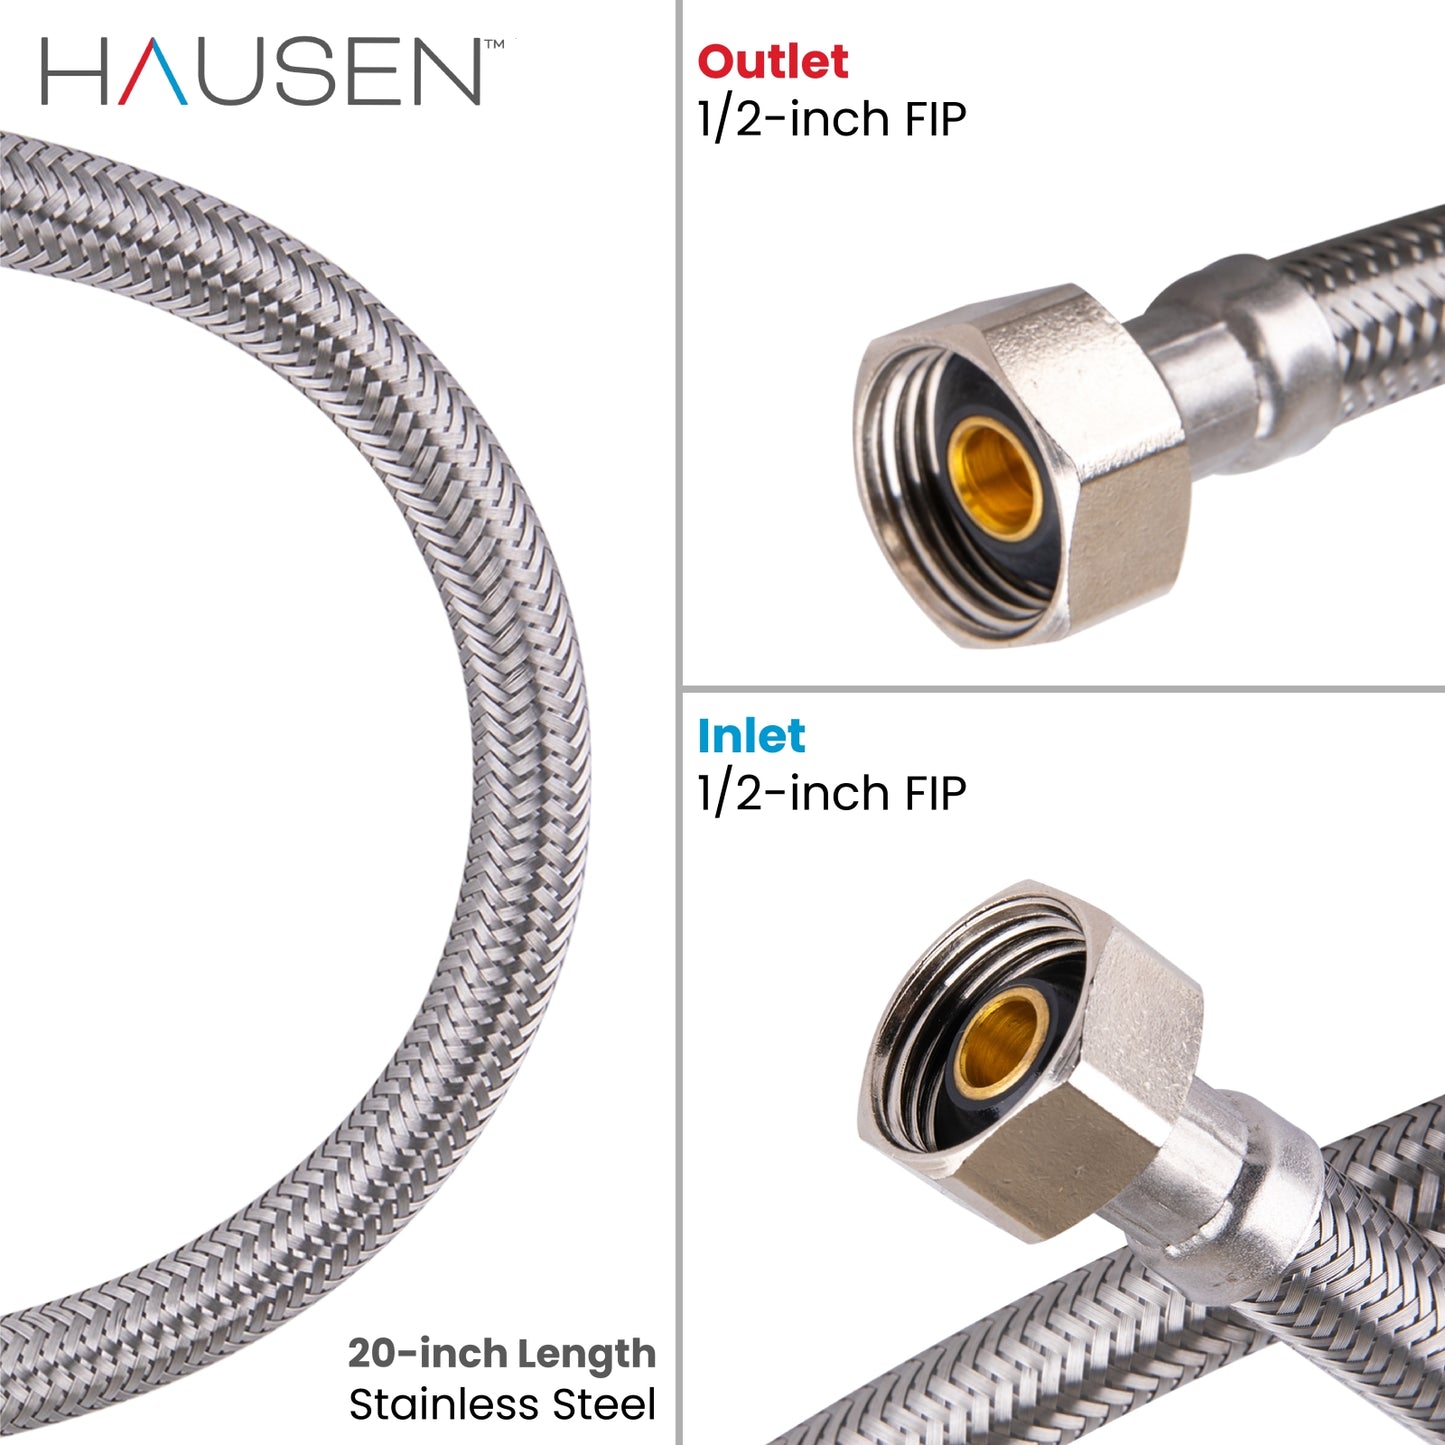 Hausen 1/2-inch FIP (Female Iron Pipe) x 1/2-inch FIP (Female Iron Pipe) x 20-inch Length Stainless Steel Faucet Water Supply Connector; Lead Free; Compatible with Standard Faucets, 2-Pack